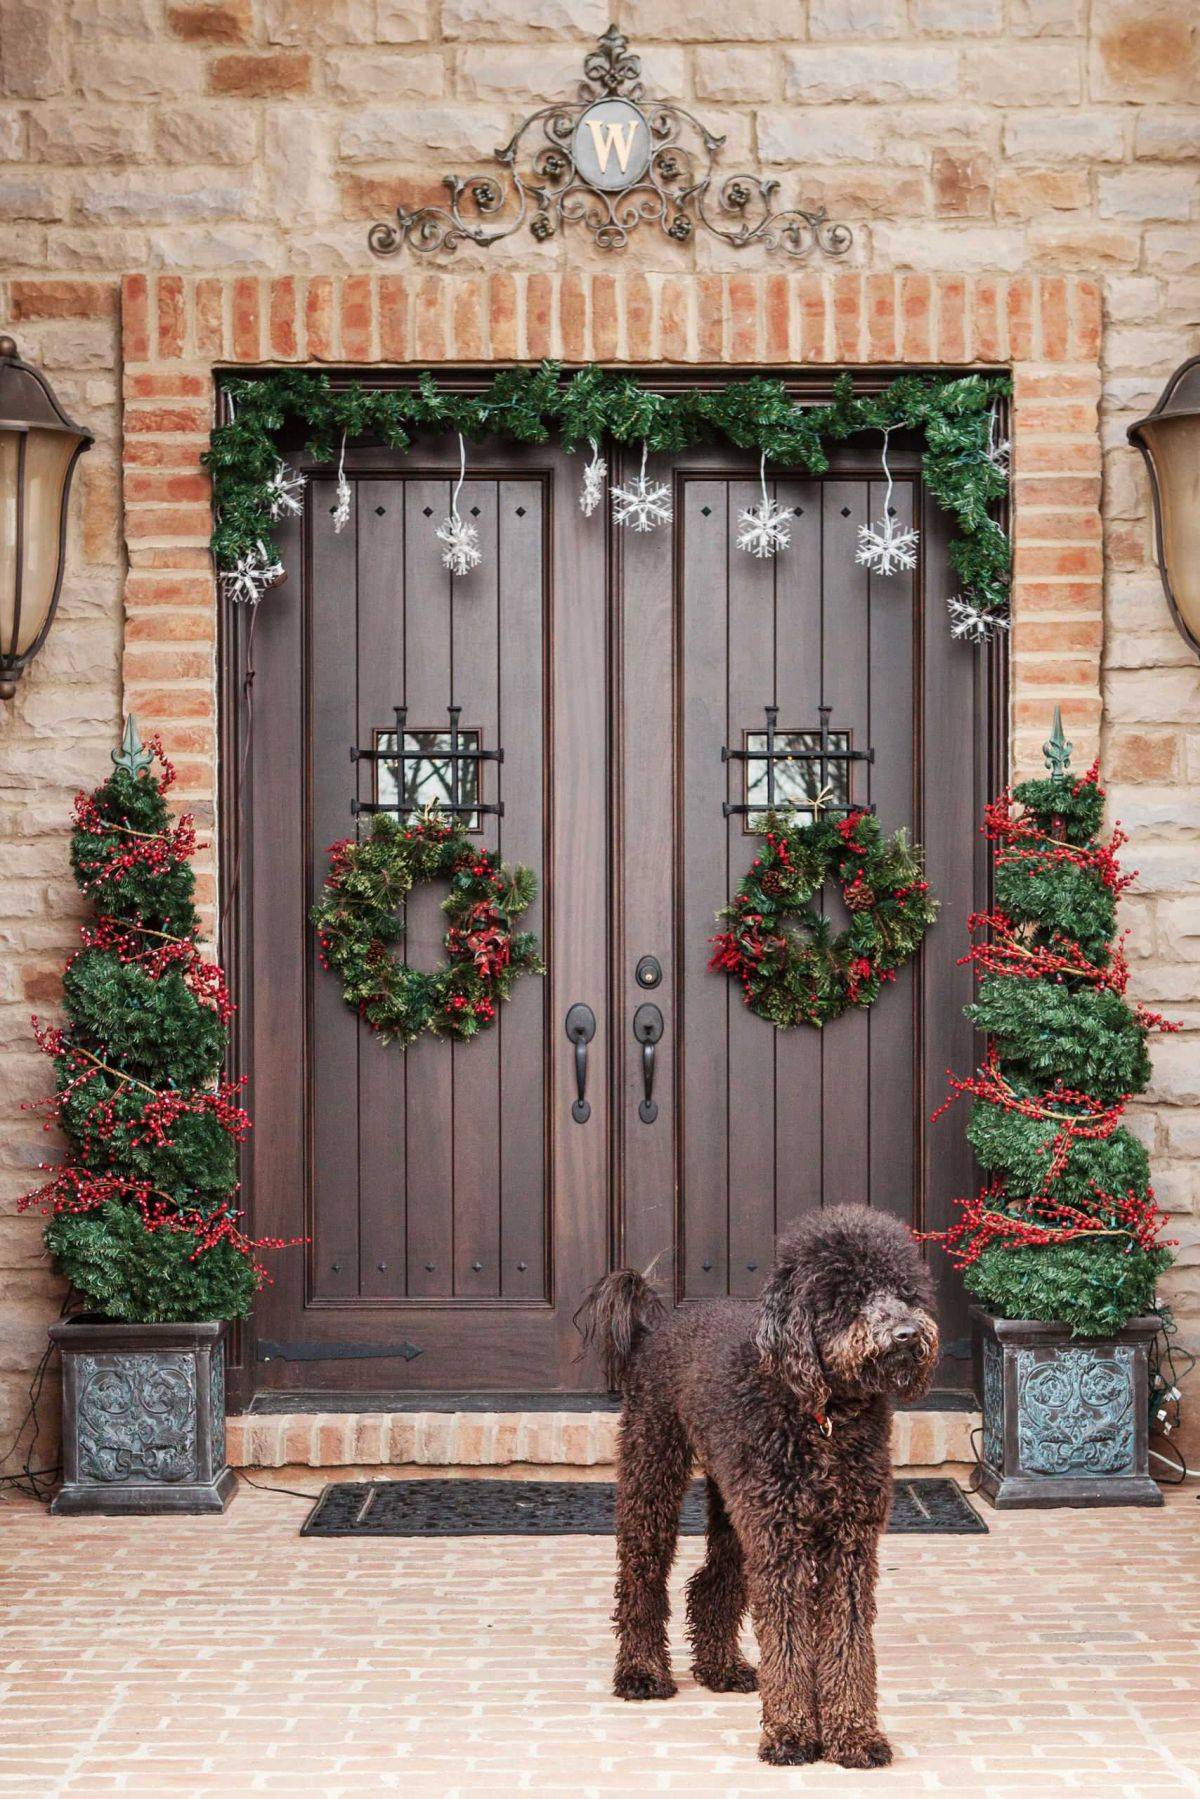 Mistle toe banner, green Christmas wreath and decked out plants for the Holiday entryway